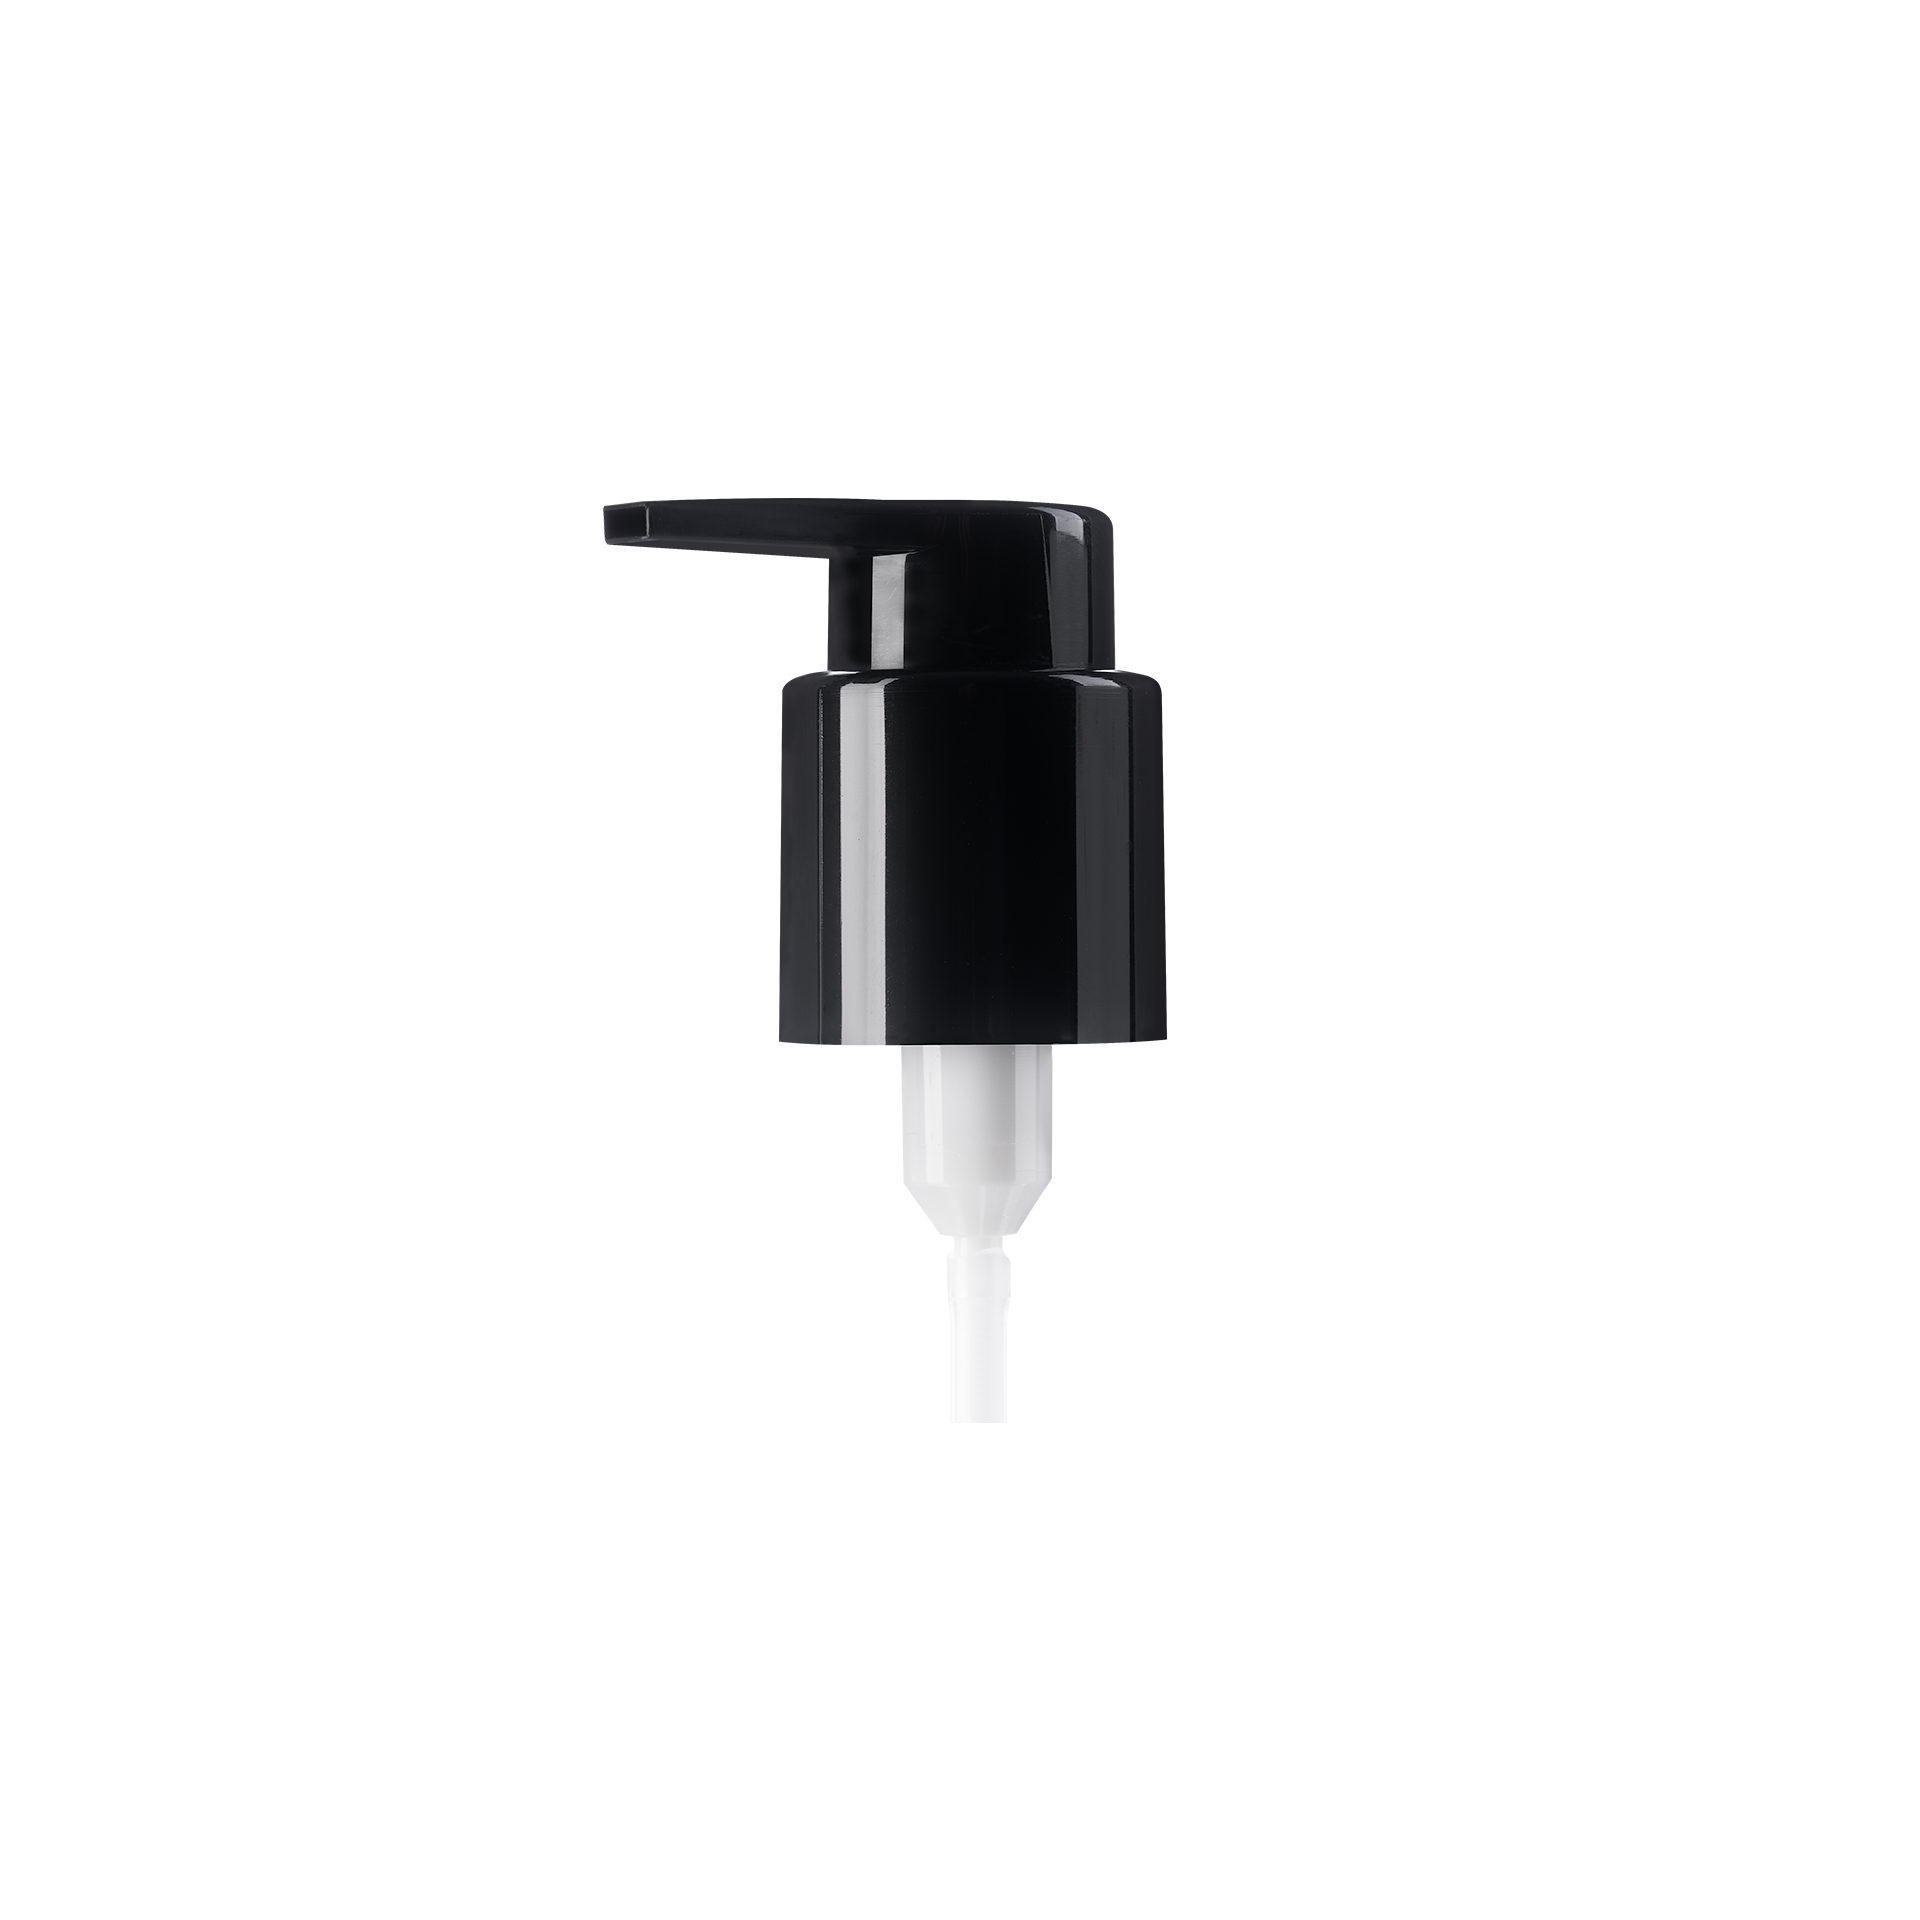 Lotion pump Extended Nozzle 24/410, PP, black, smooth, dose 0.50ml, security clip (Luna 100)